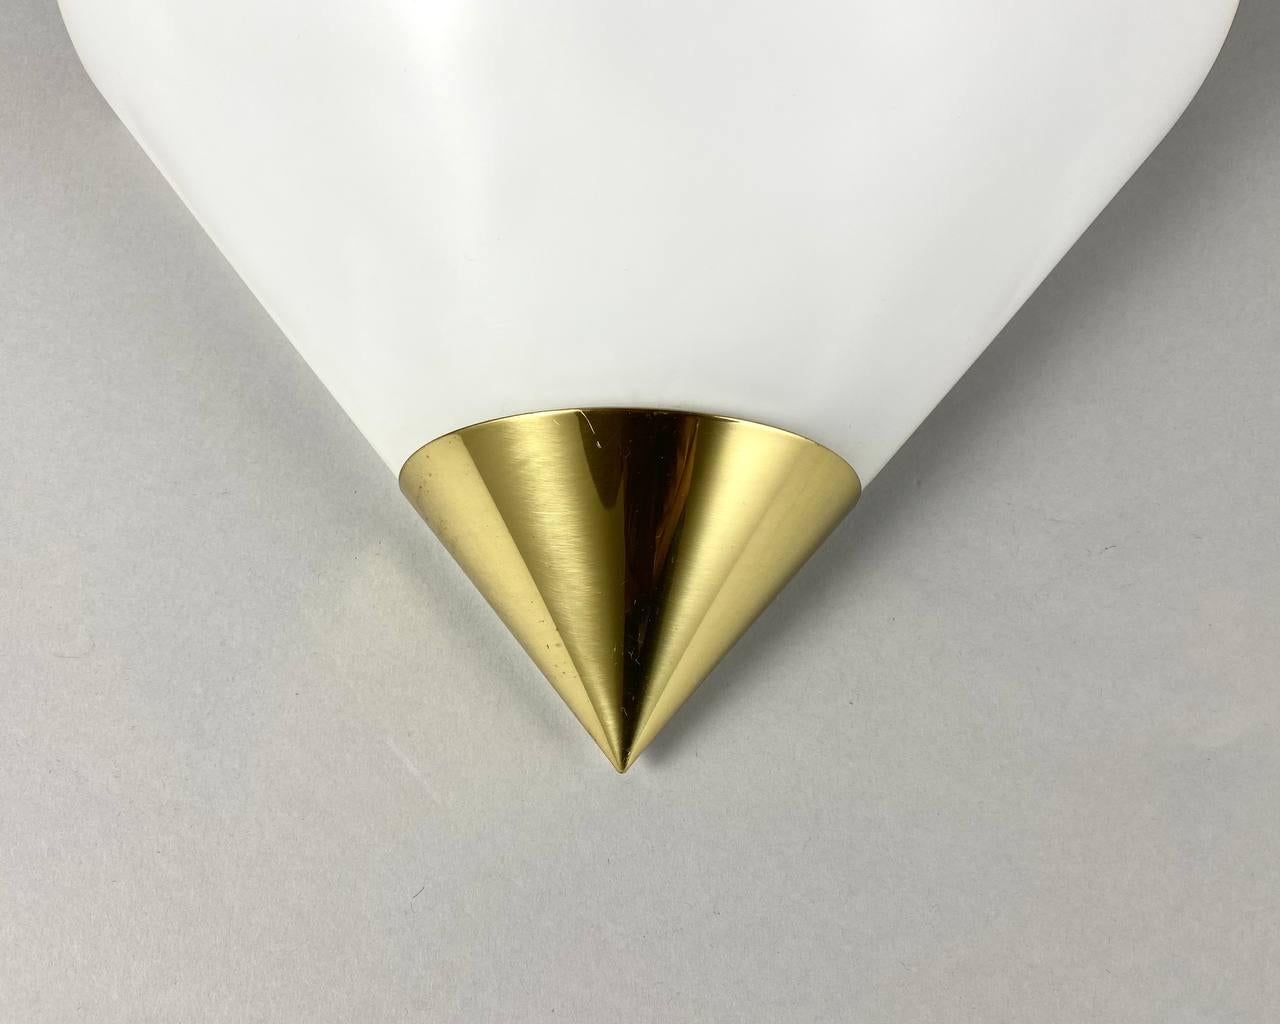 Beautiful set of opaline hand-blown glass design wall lamps with brass fixture from the 1970s/80s from the German Glashütte Limburg.

Mid-Century Modern wall sconces with beautiful conical shape.

Original label intact on both lamps.

The